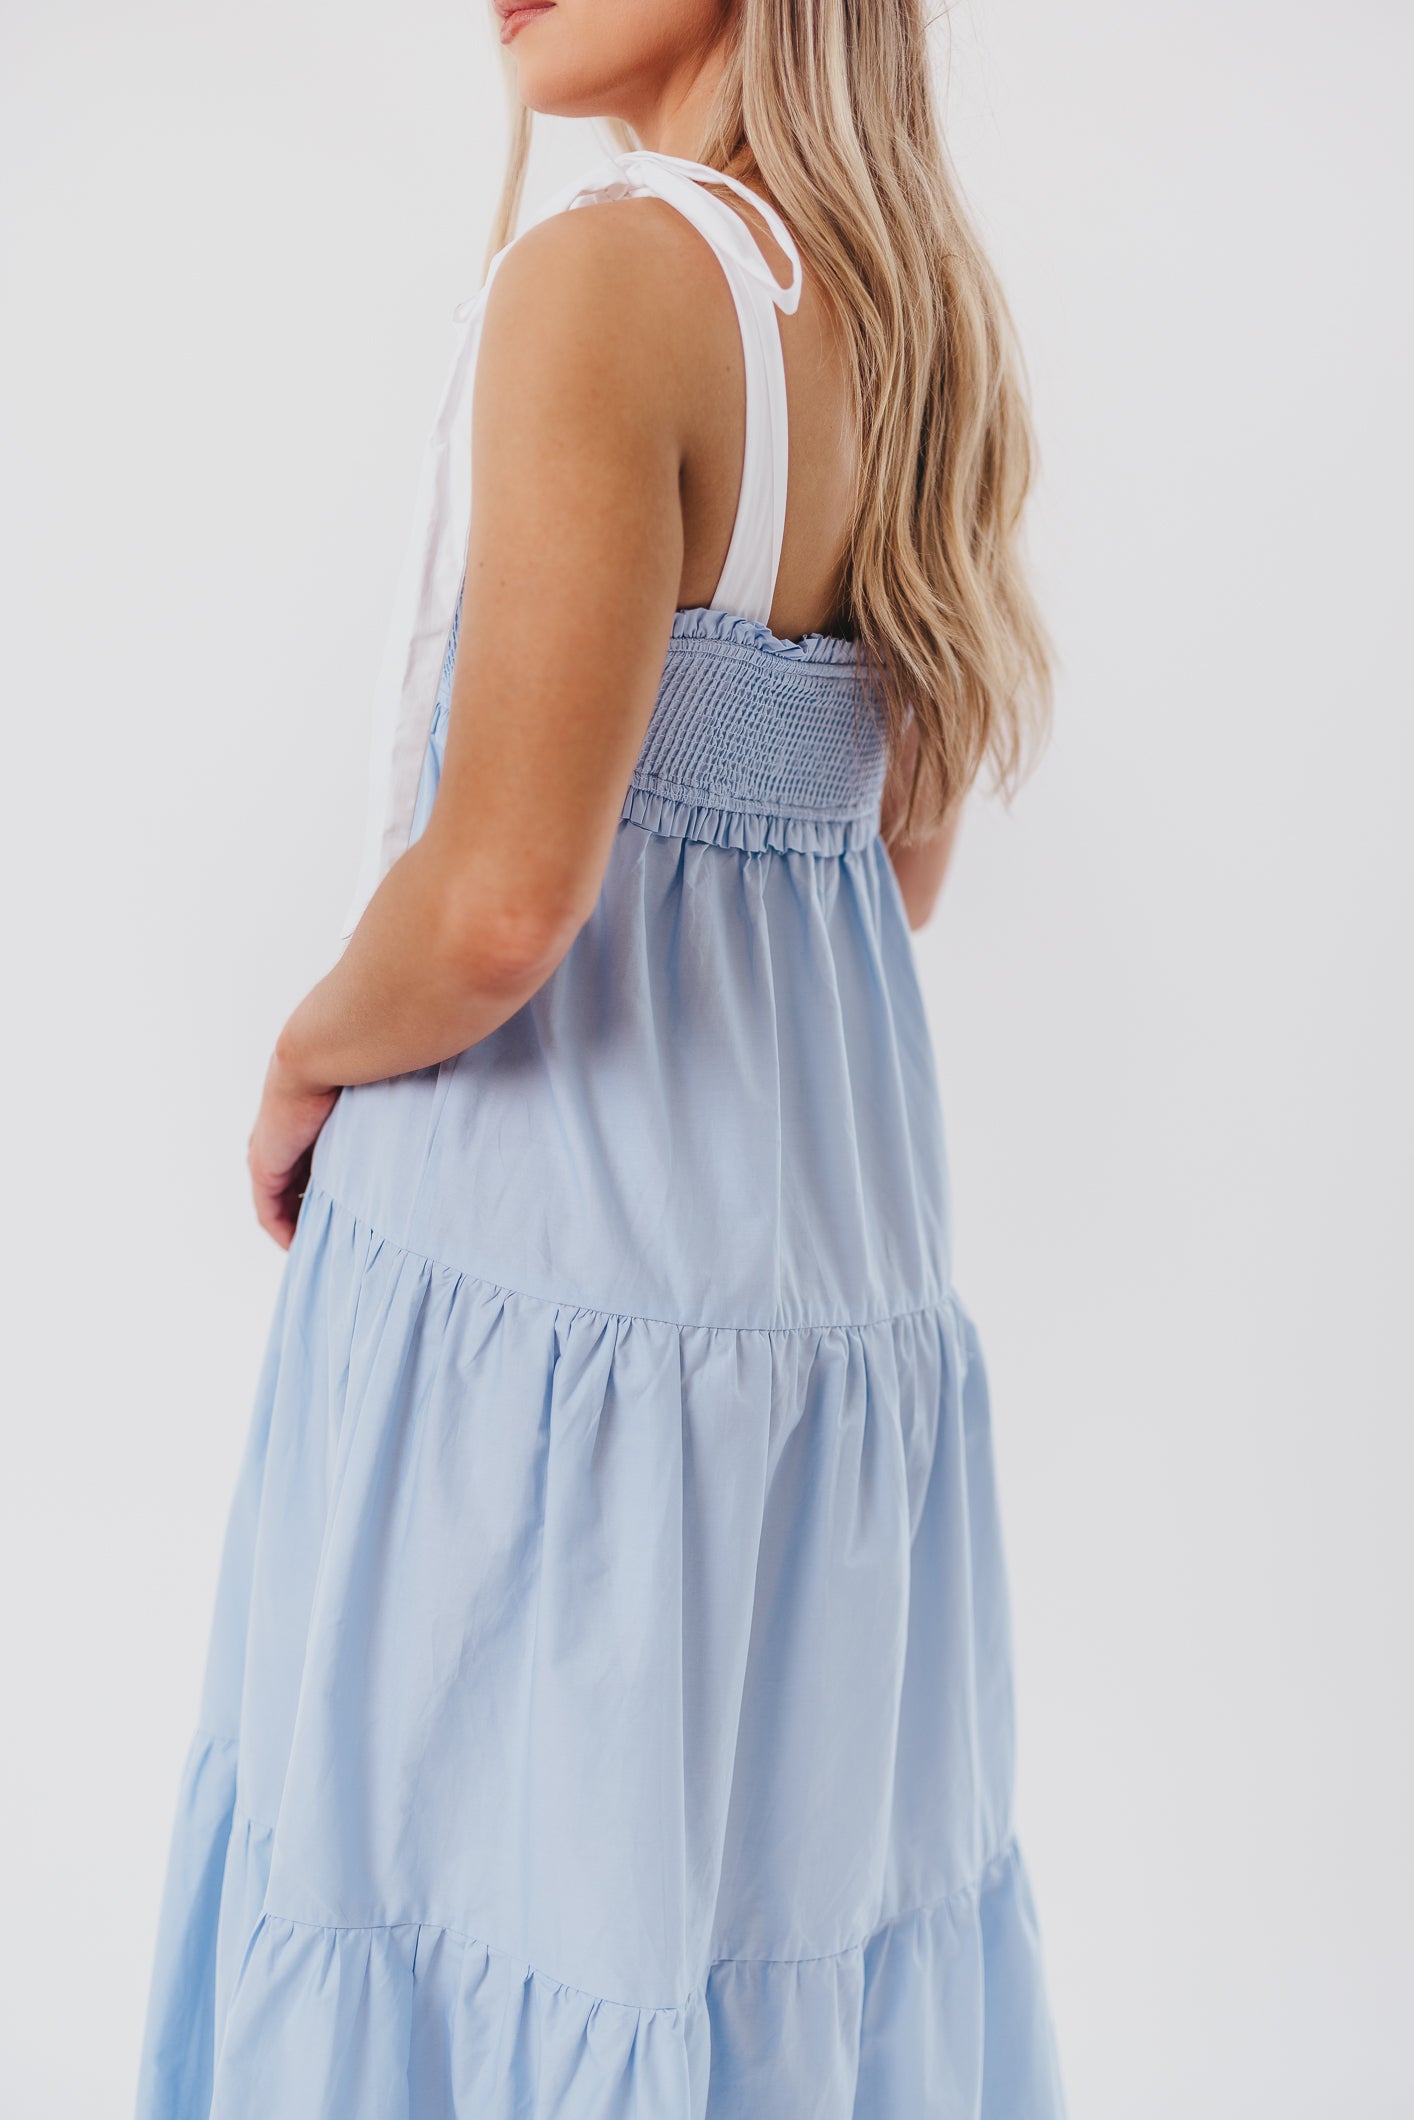 Amber Smocked Maxi Dress with Shoulder Tie in Chambray/Ivory